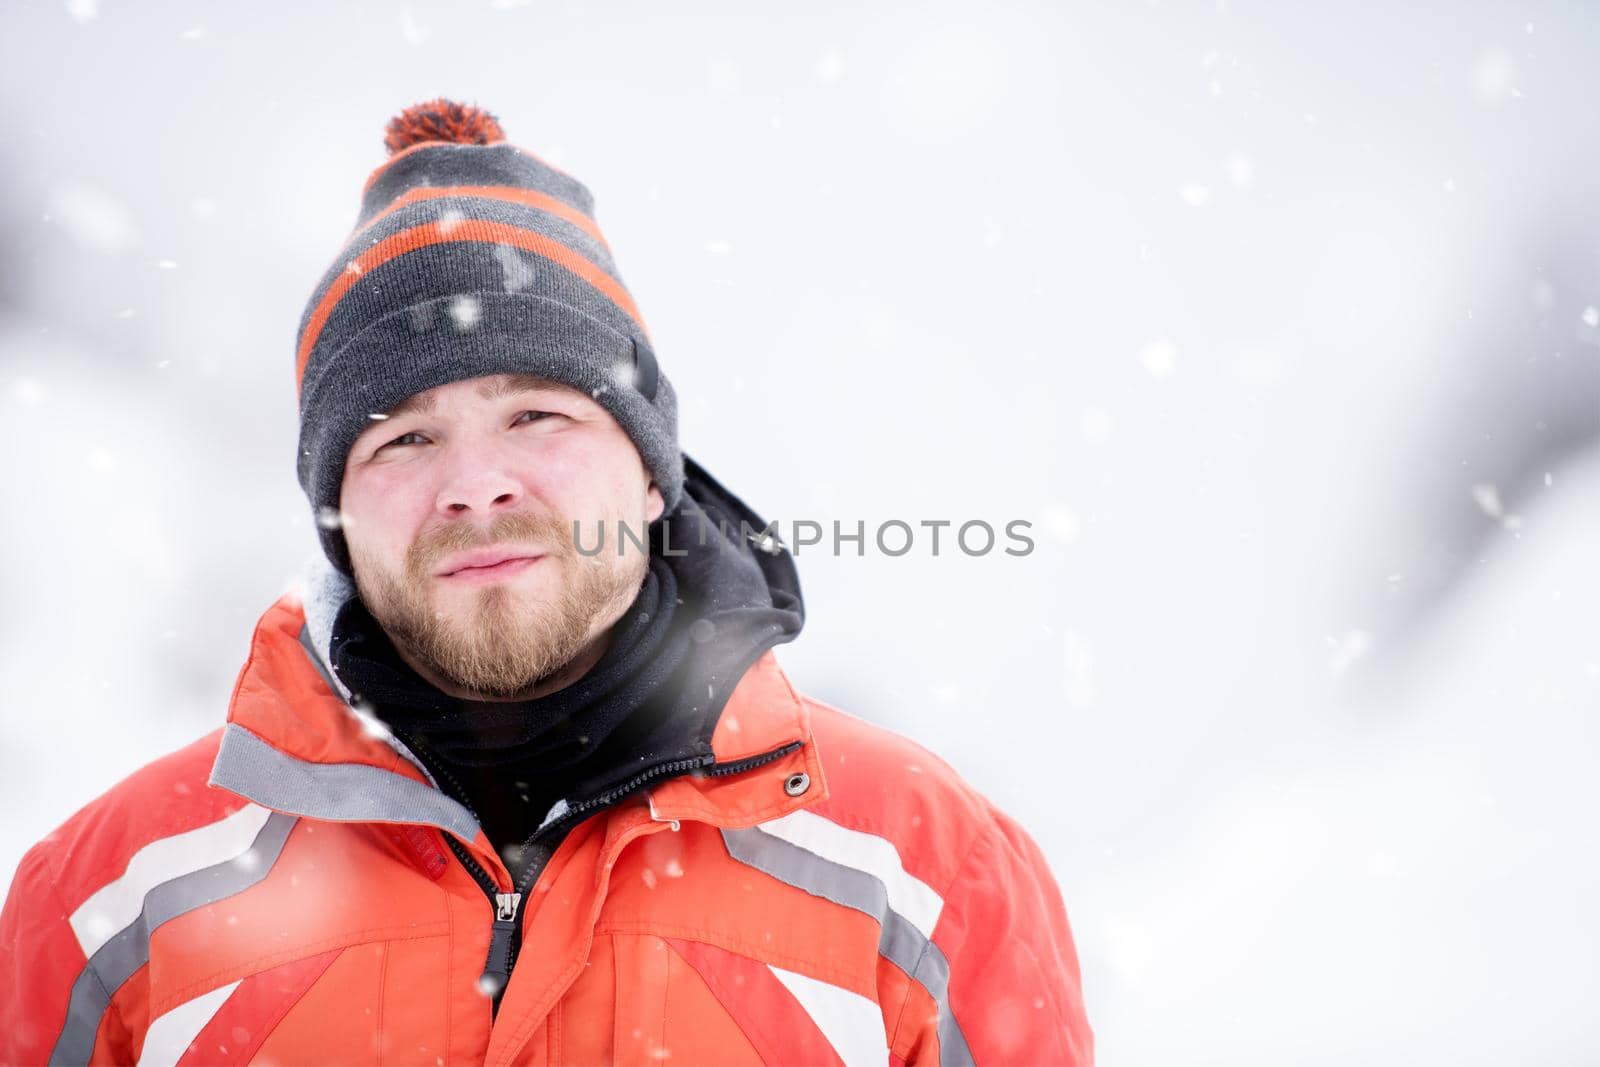 Man in winter season  Portrait of young man in warm clothes enjoying snowy day with snowflakes around him in the winter forest